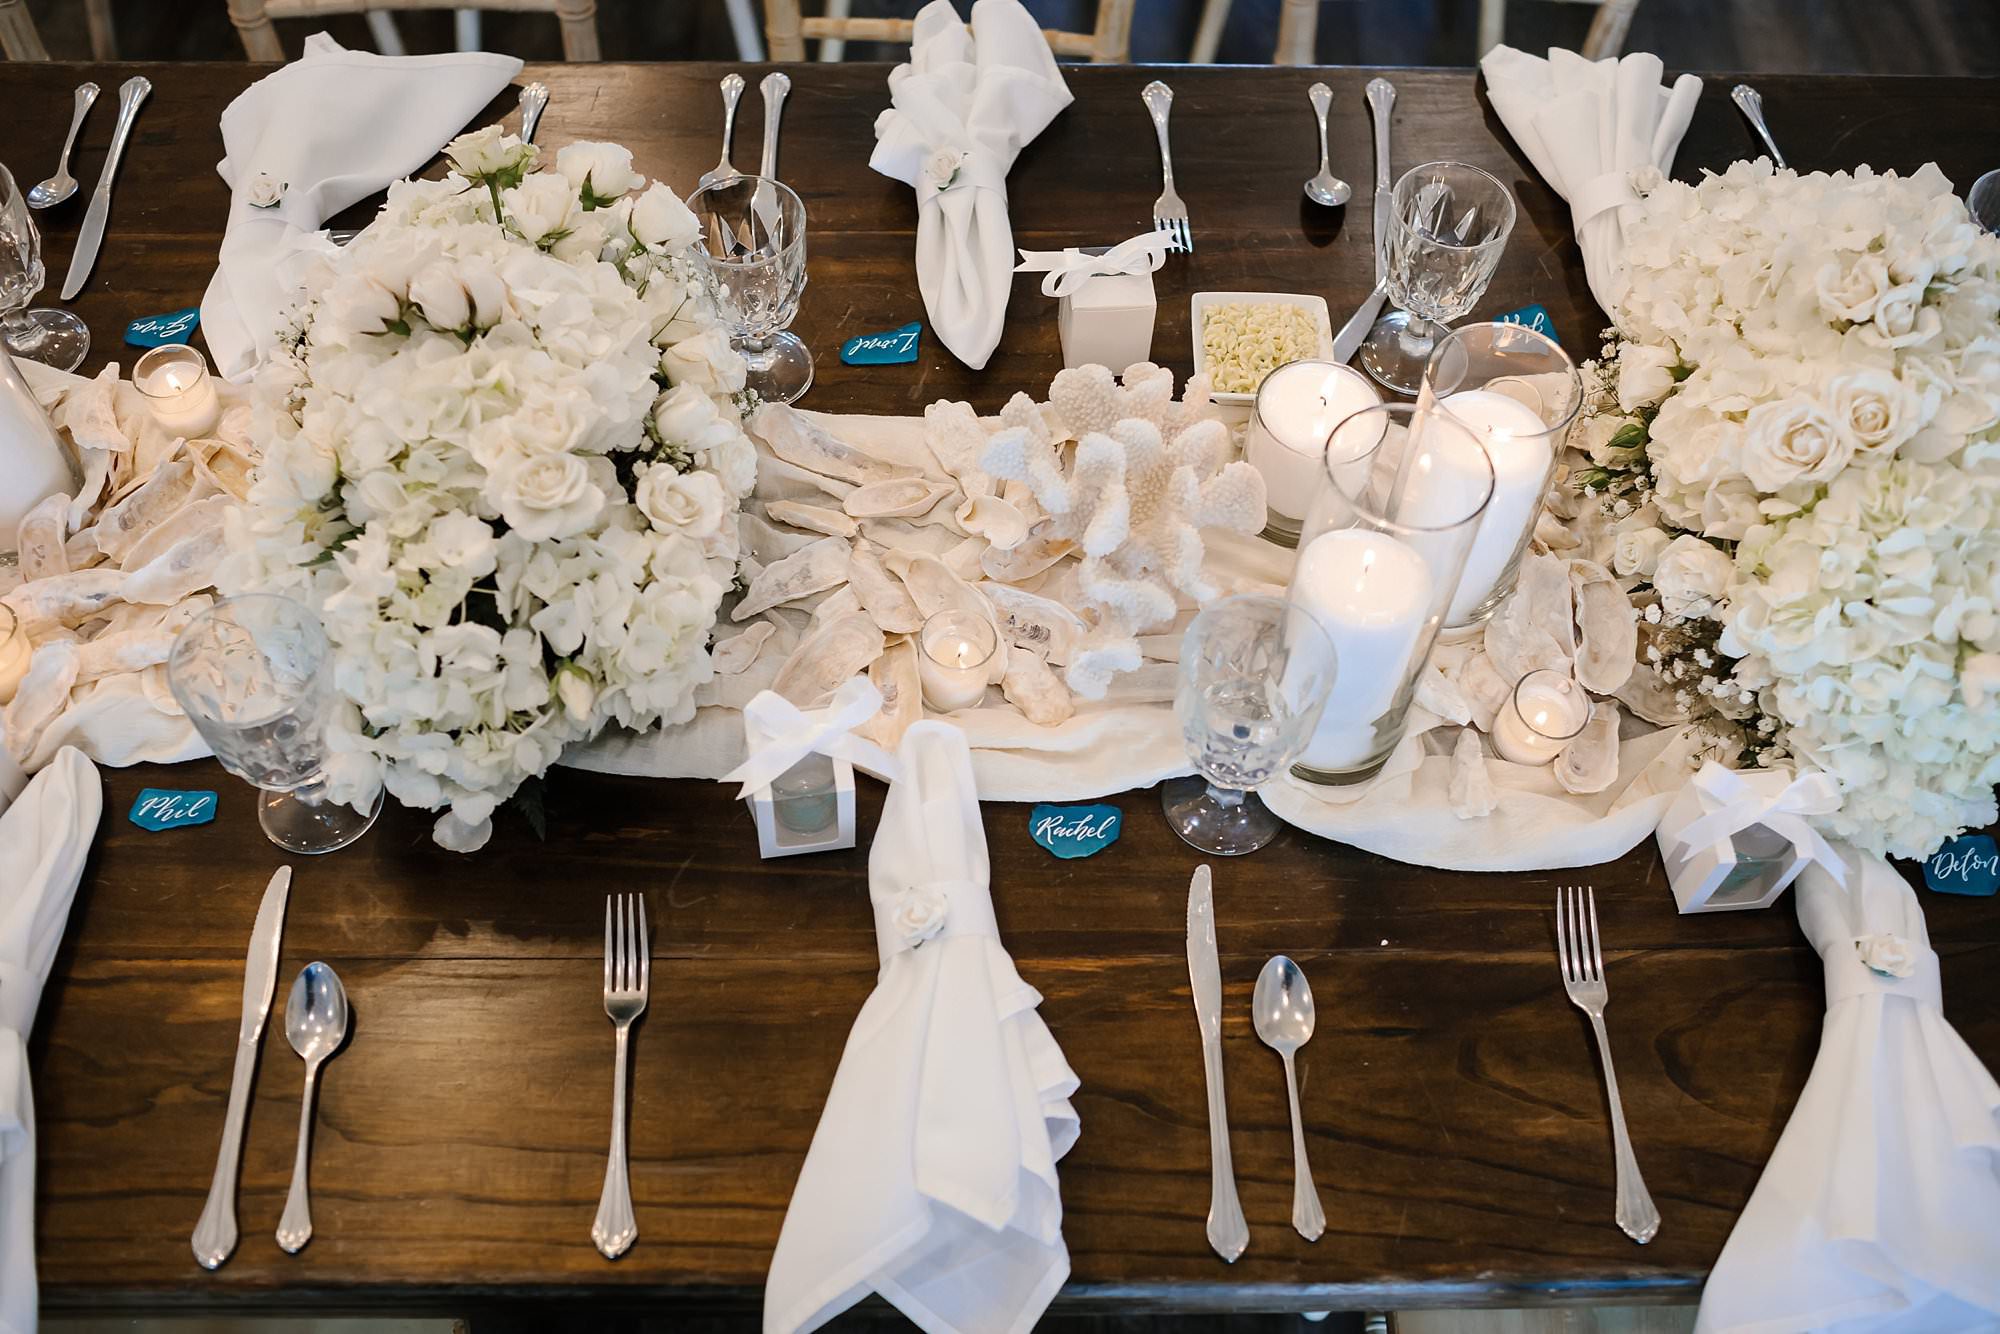 Lay flay of wedding reception table decor of dark wood farm table set with white rose centerpieces white shells candles white linen and aqua sea glass place cards